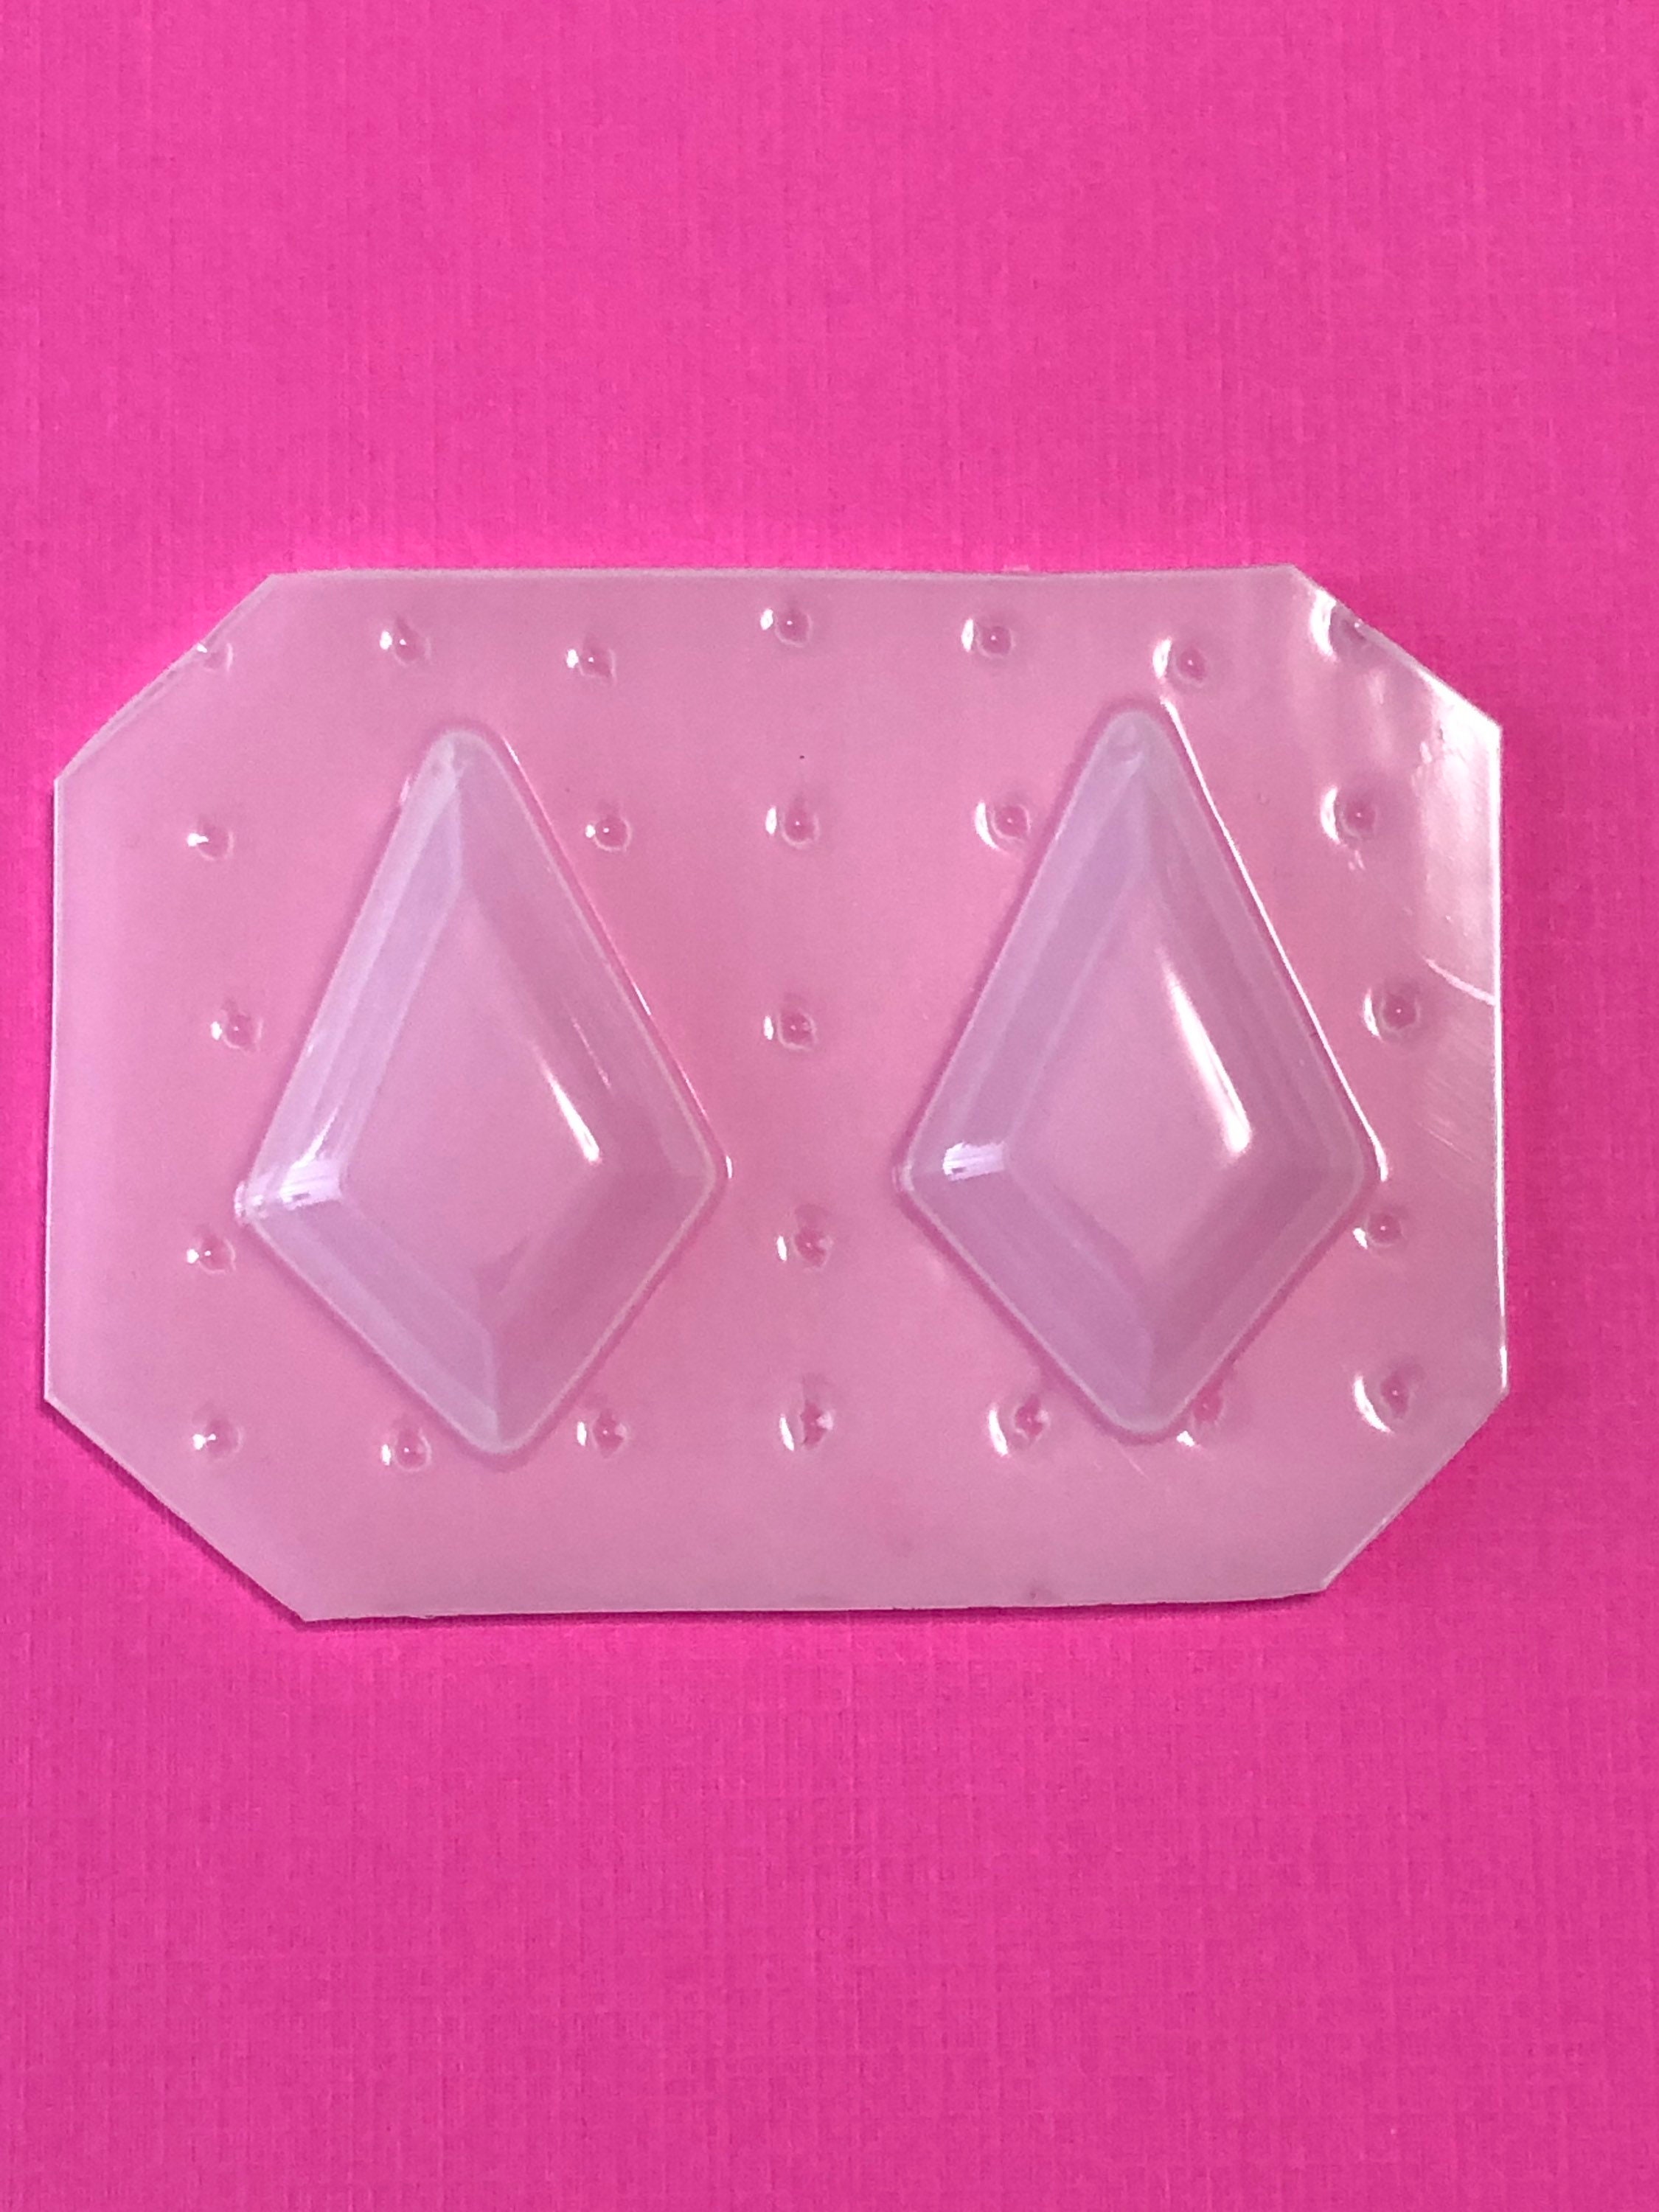 Diamond Flat Shiny Silicone Mold for Resin Crafting Wall Hanging Coast -  Zapp3D Design LLC